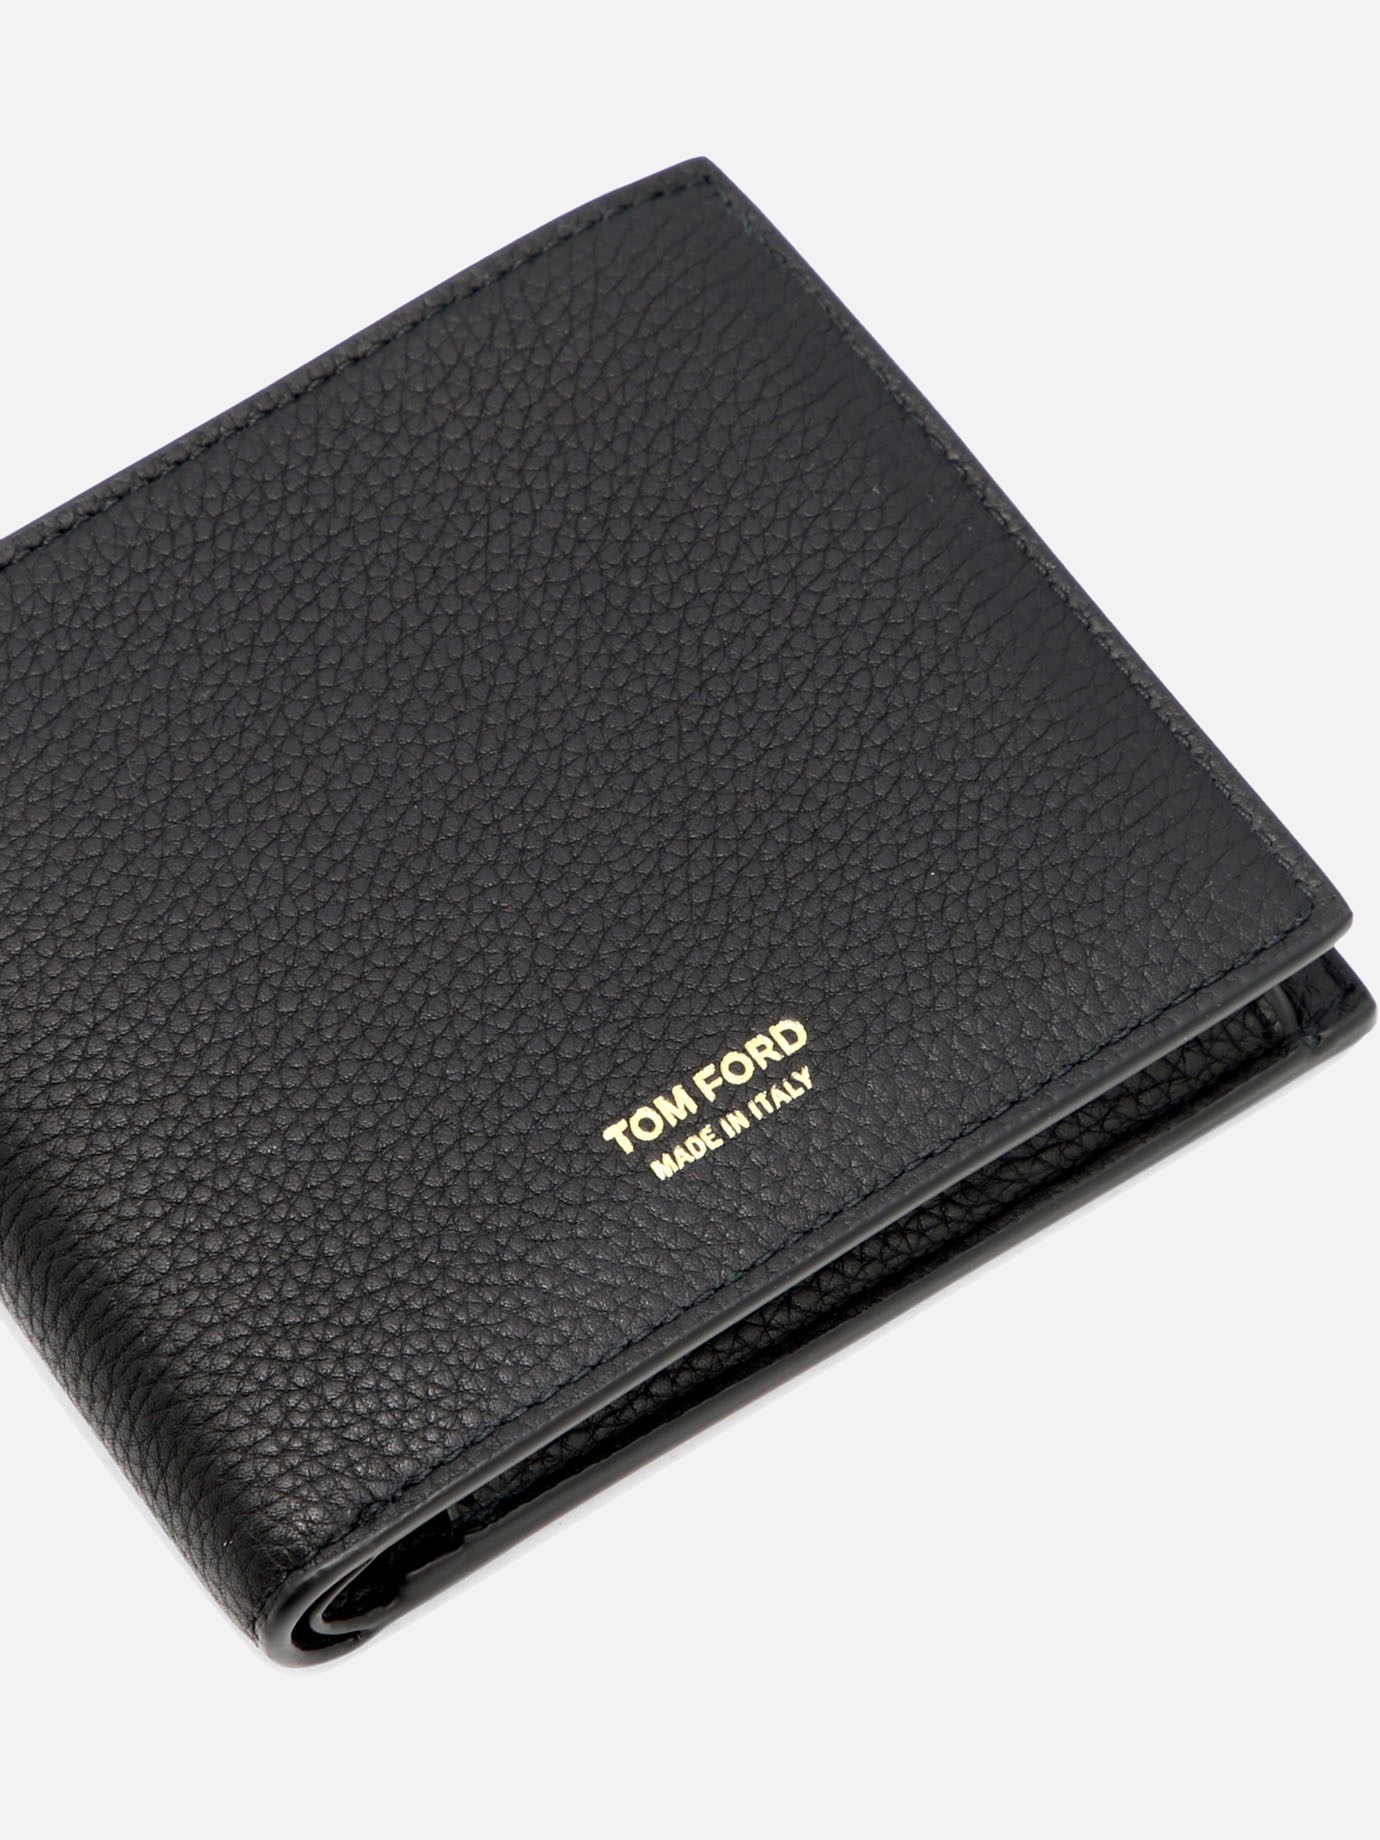 Bifold wallet by Tom Ford